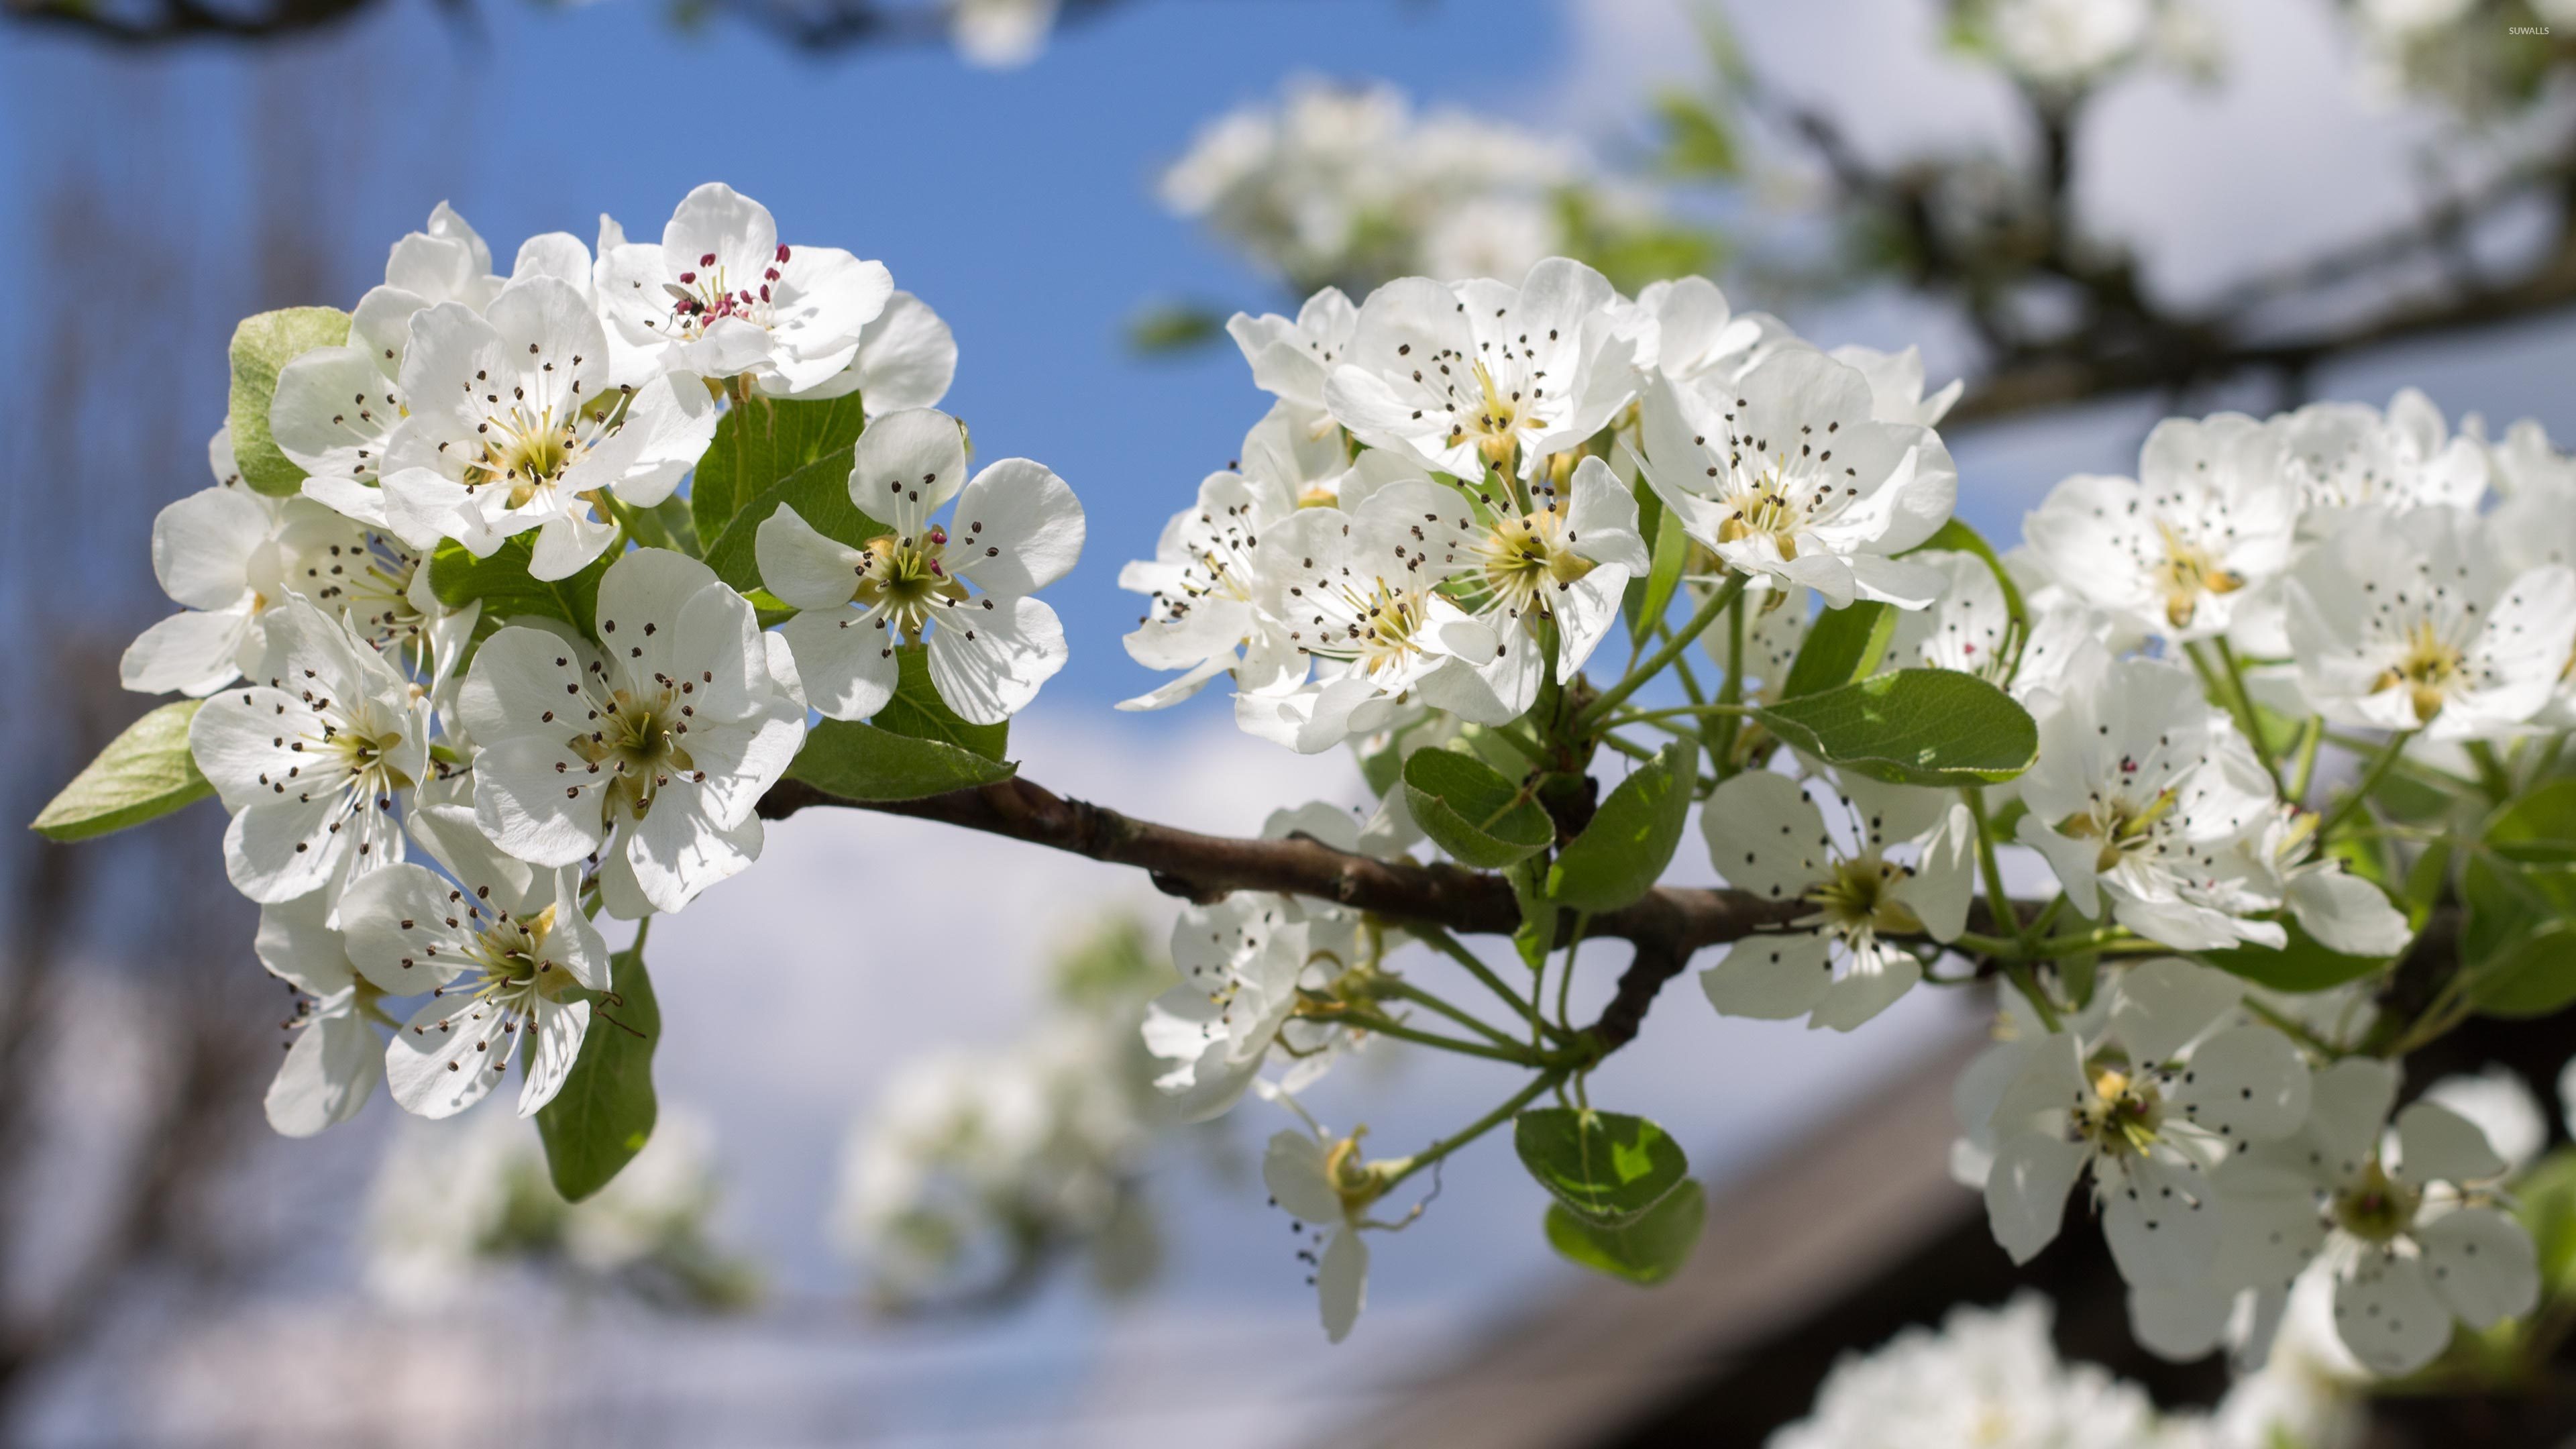 Spring blossoms on a pear tree wallpaper - Flower wallpapers - #51698